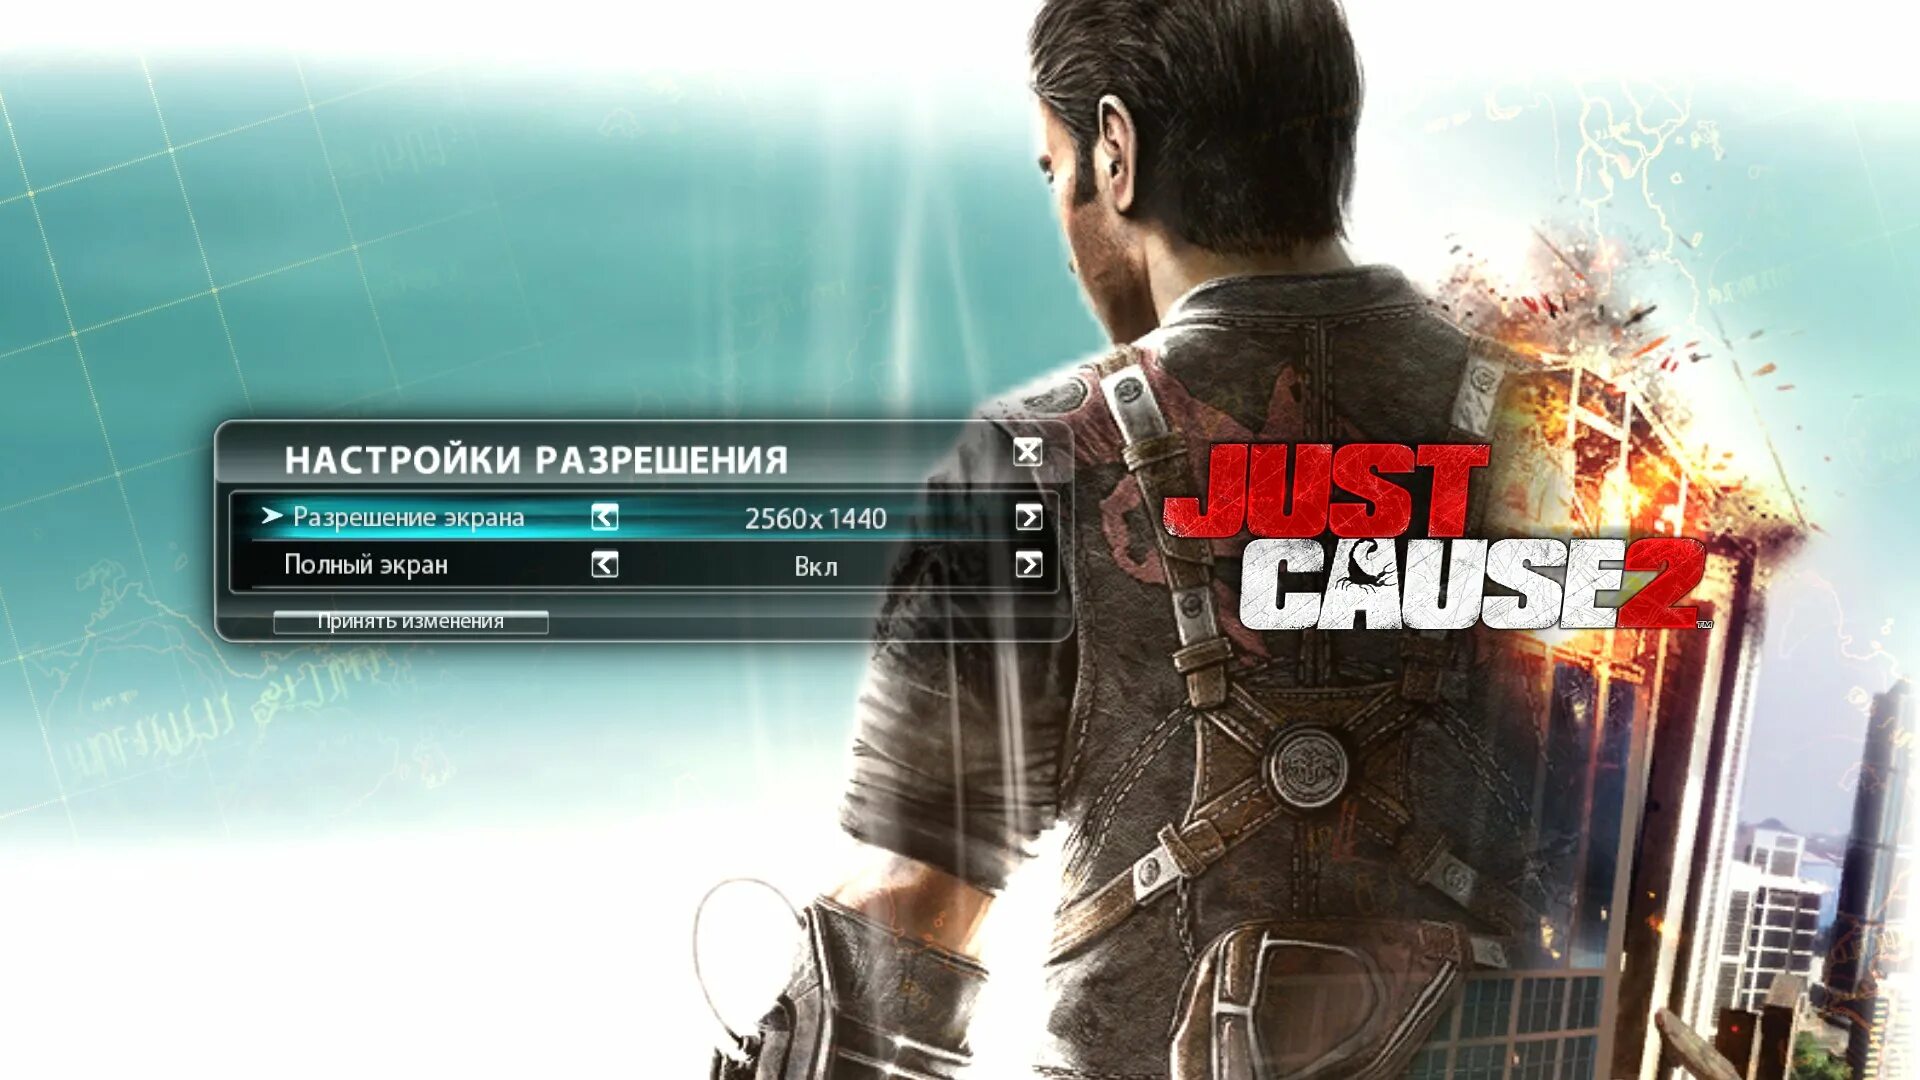 Just cause 2 Xbox 360 диск. Just cause 1 диск. Just cause 2 диск. Разрешение экрана в играх. Just one game